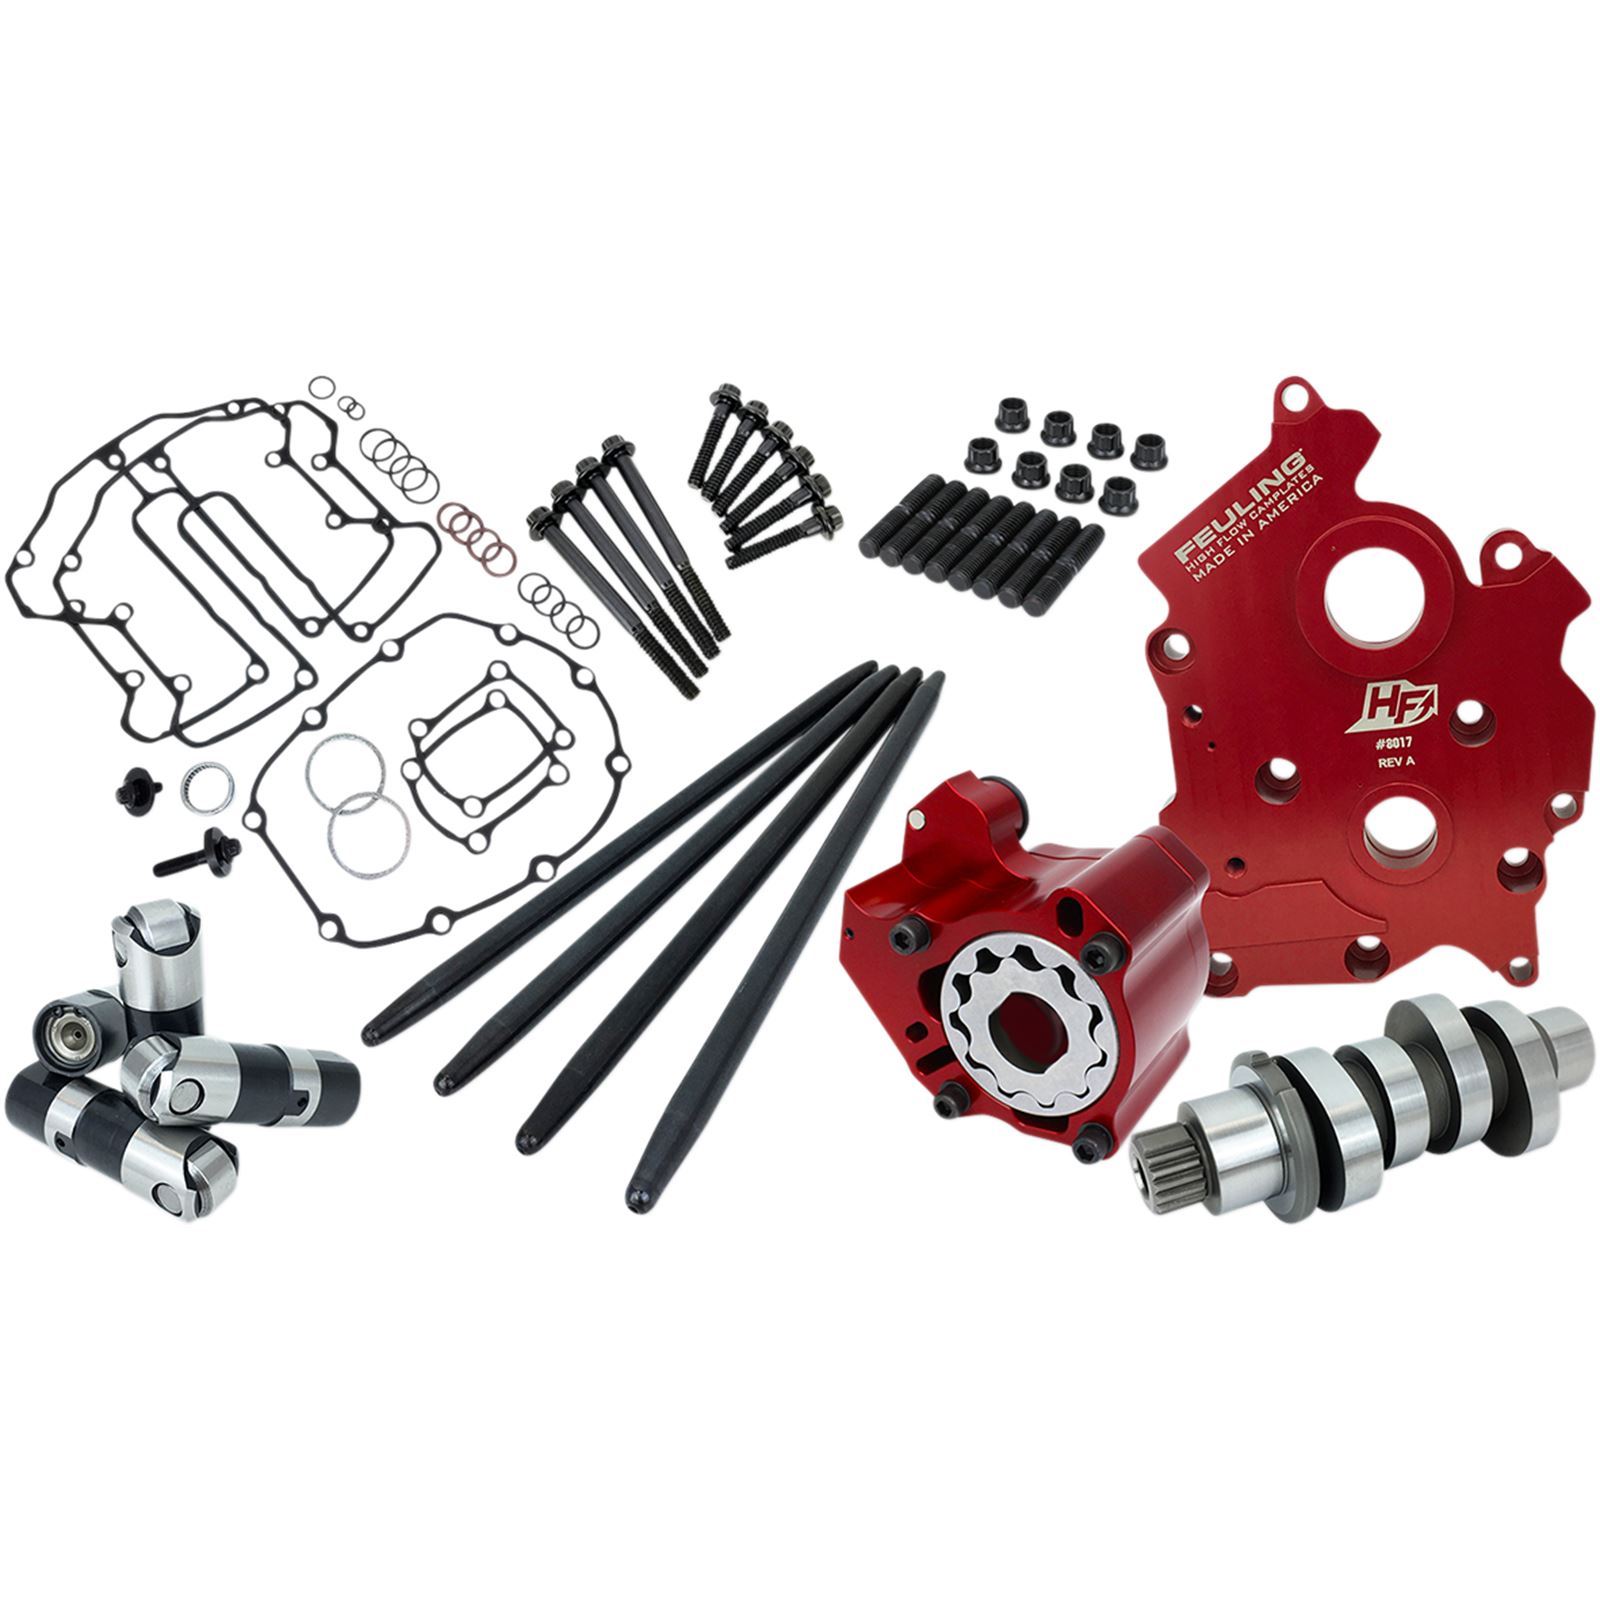 Feuling Cam Chest Kit - 465 Race Series - Water Cooled - Milwaukee-Eight